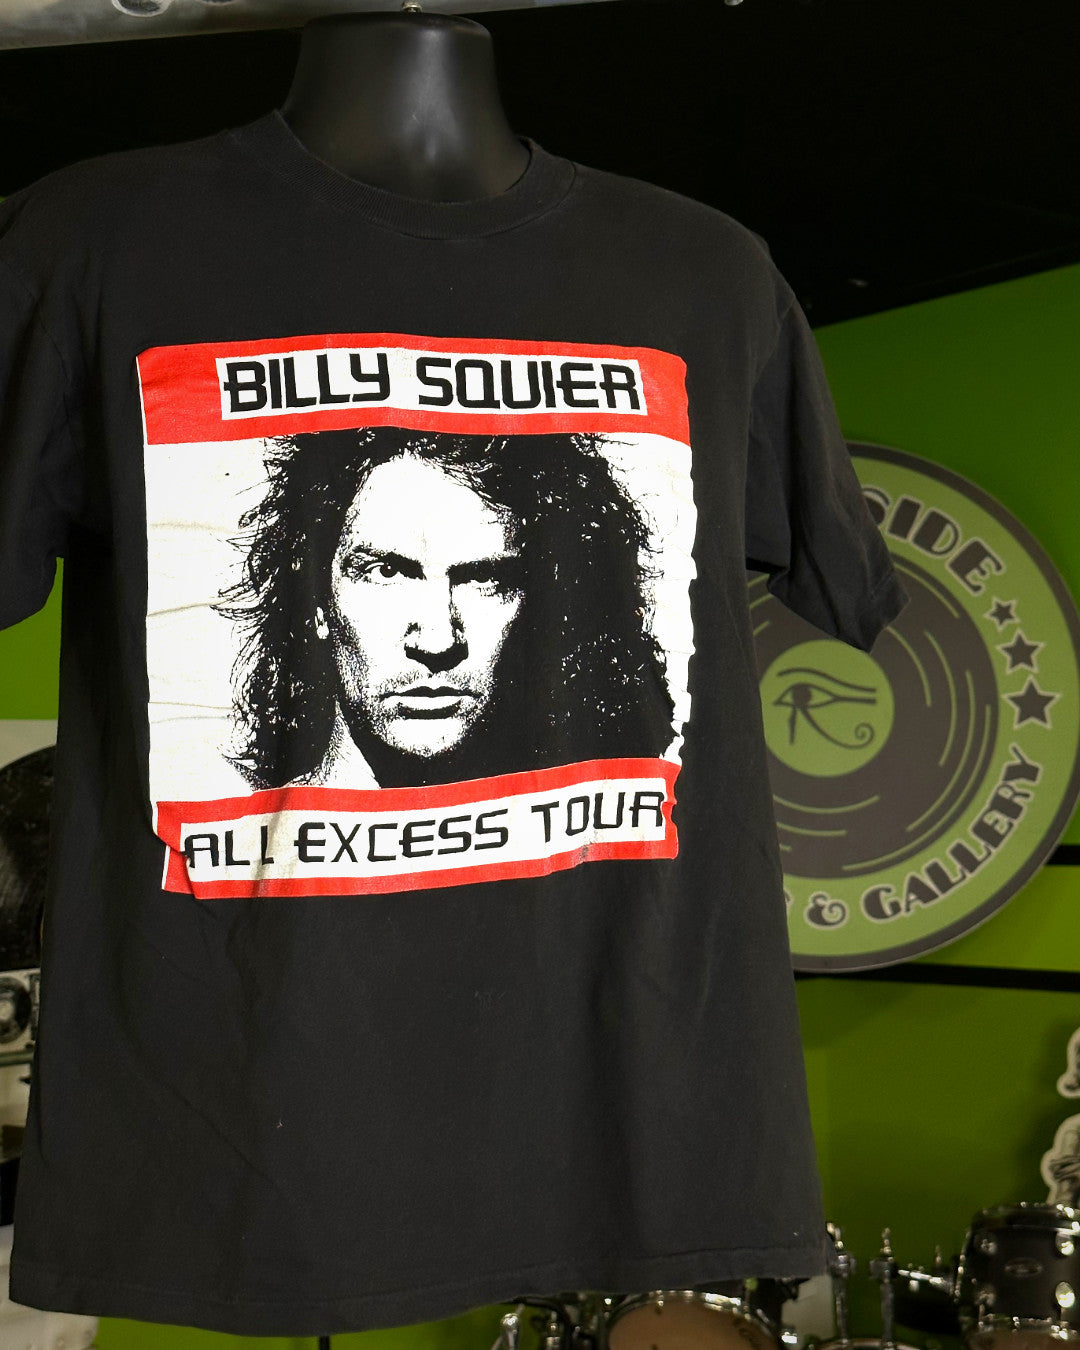 Billy Squier 1989 All Excess Tour T-Shirt, Blk, M (Tagged L)(Measures 26.5” Long, 19” Pit To Pit) - Darkside Records